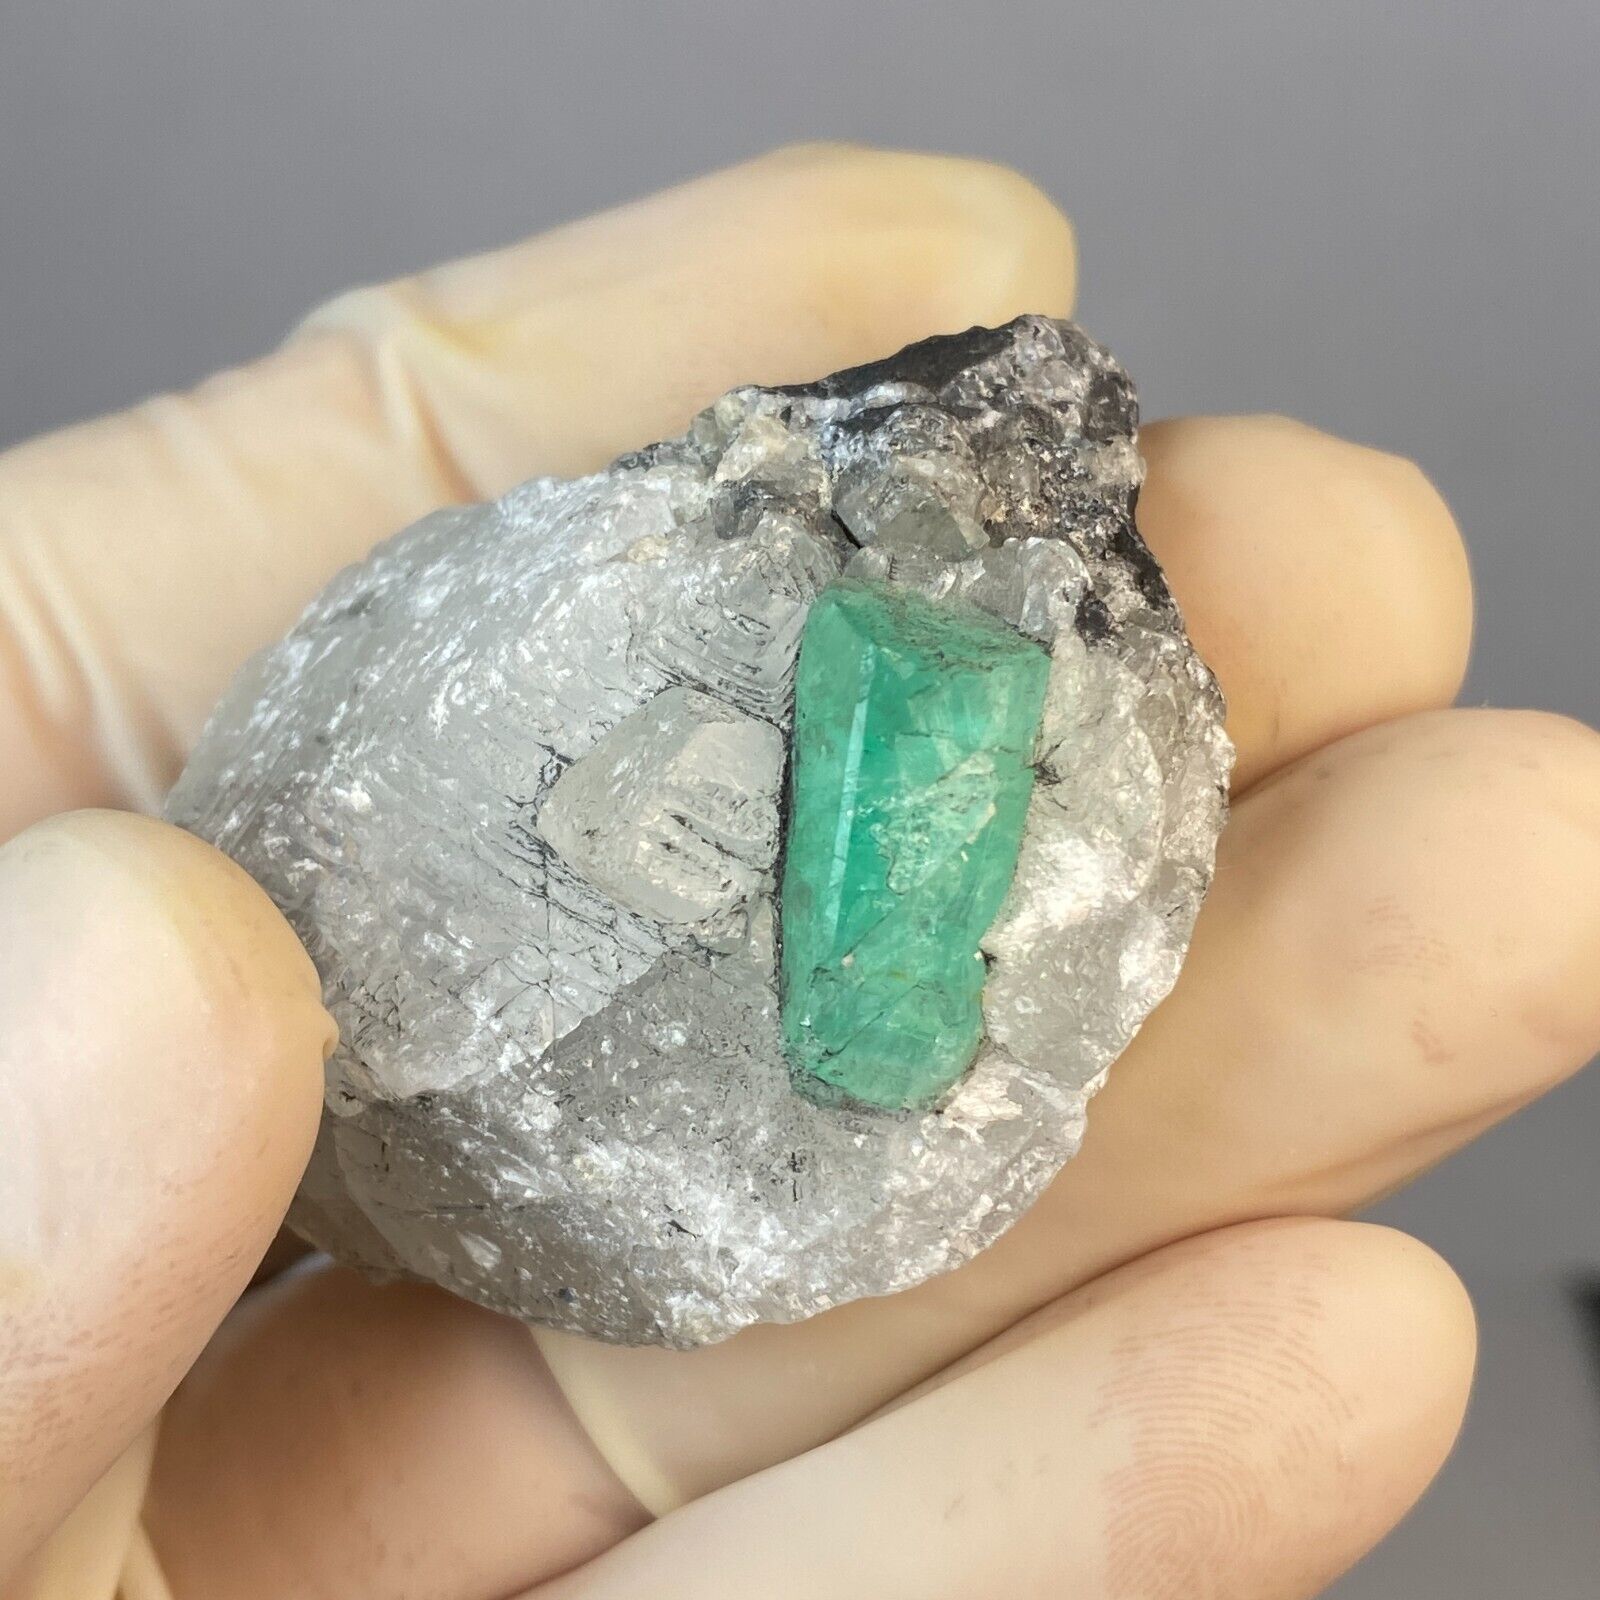 VERY CLEAR NATURAL EMERALD CRYSTAL ON MATRIX  FROM MUZO COLOMBIA 44.43 grams